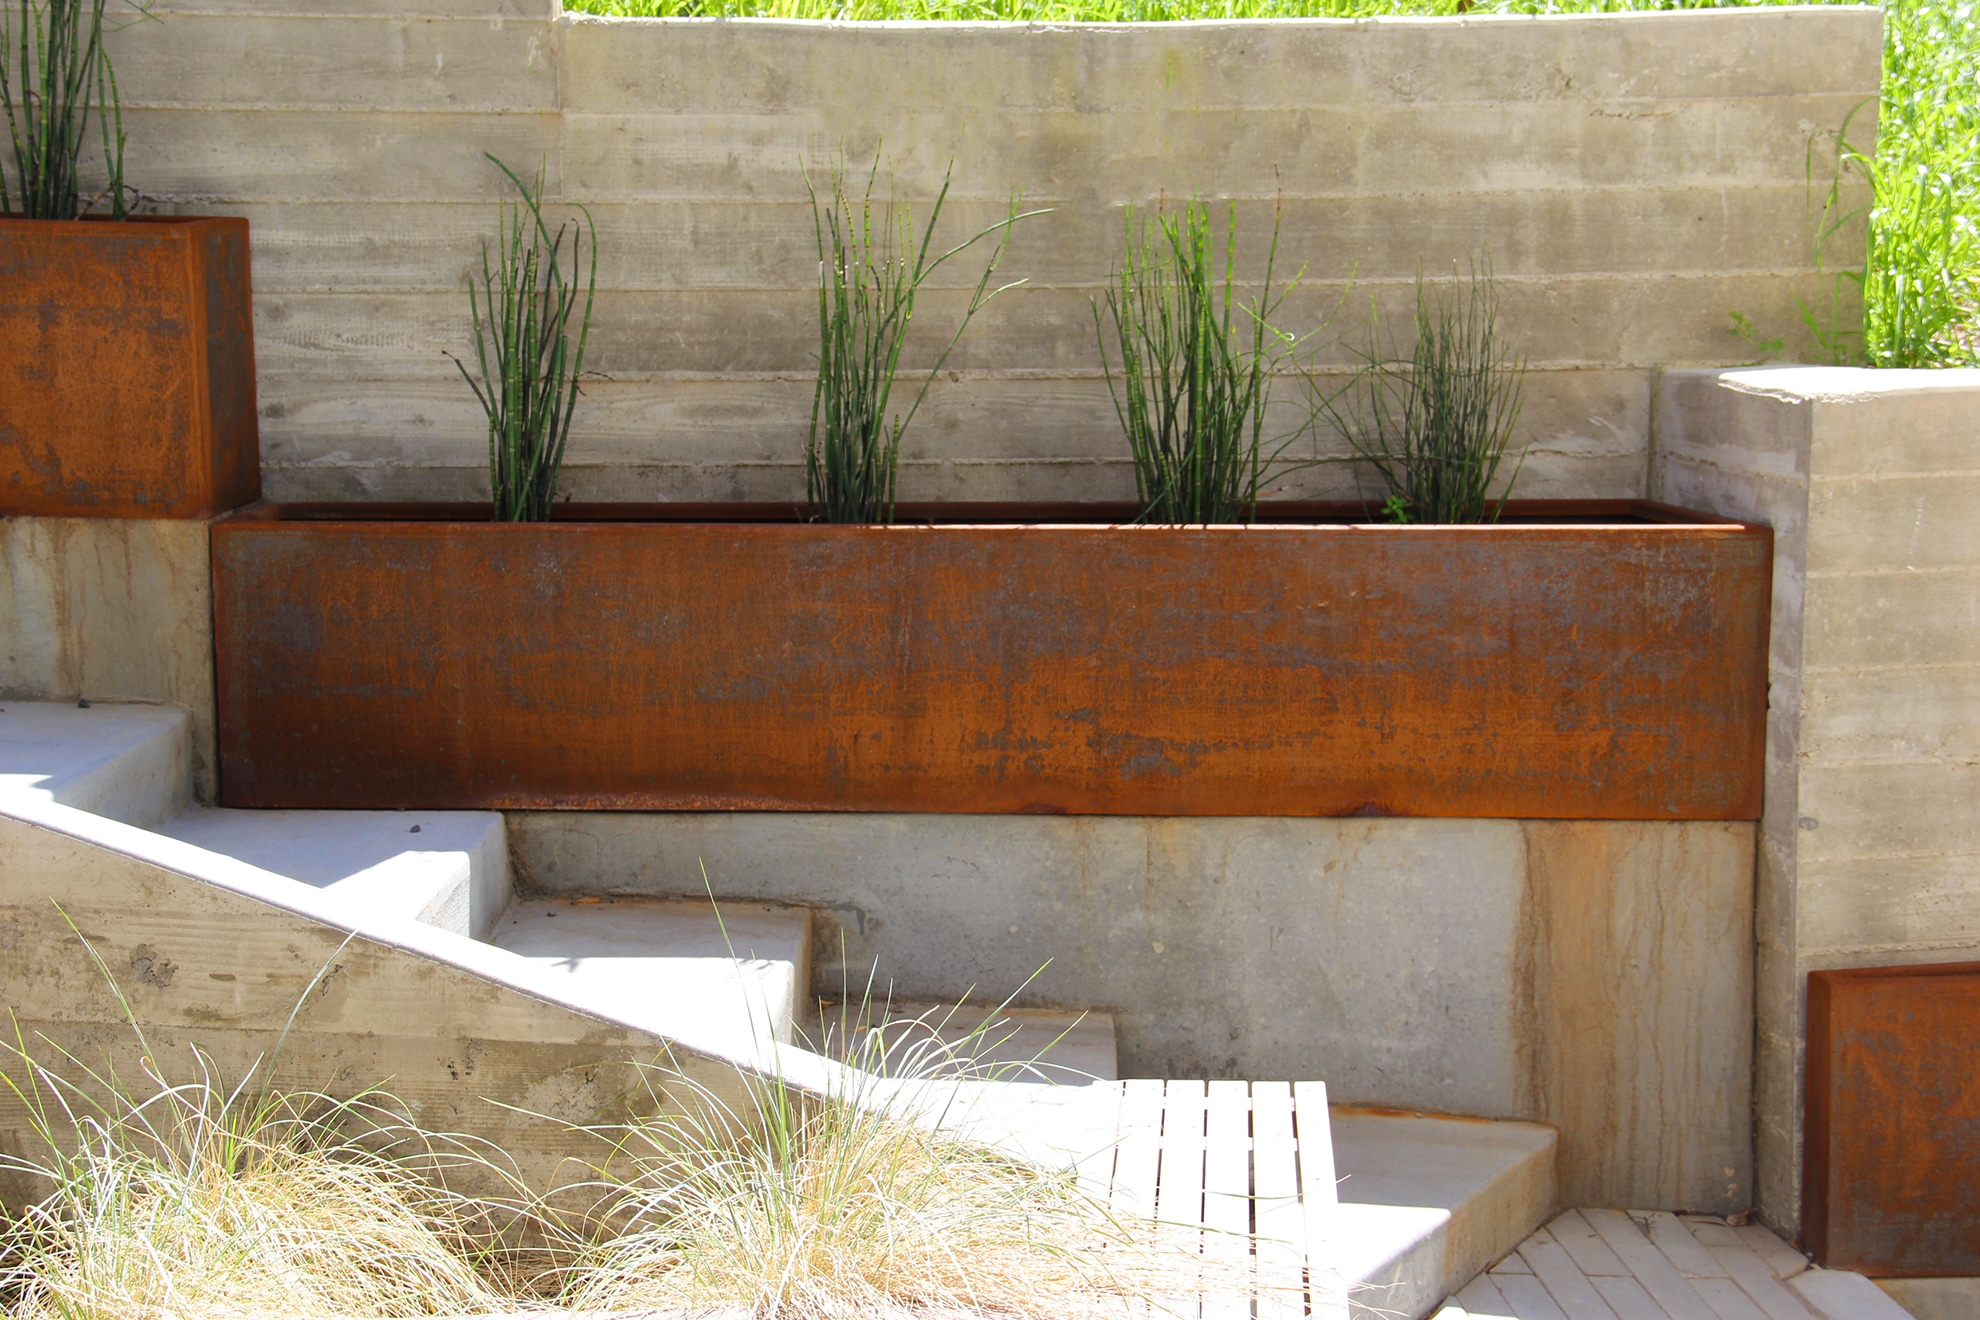 slightly russteel planters with horsetail plants